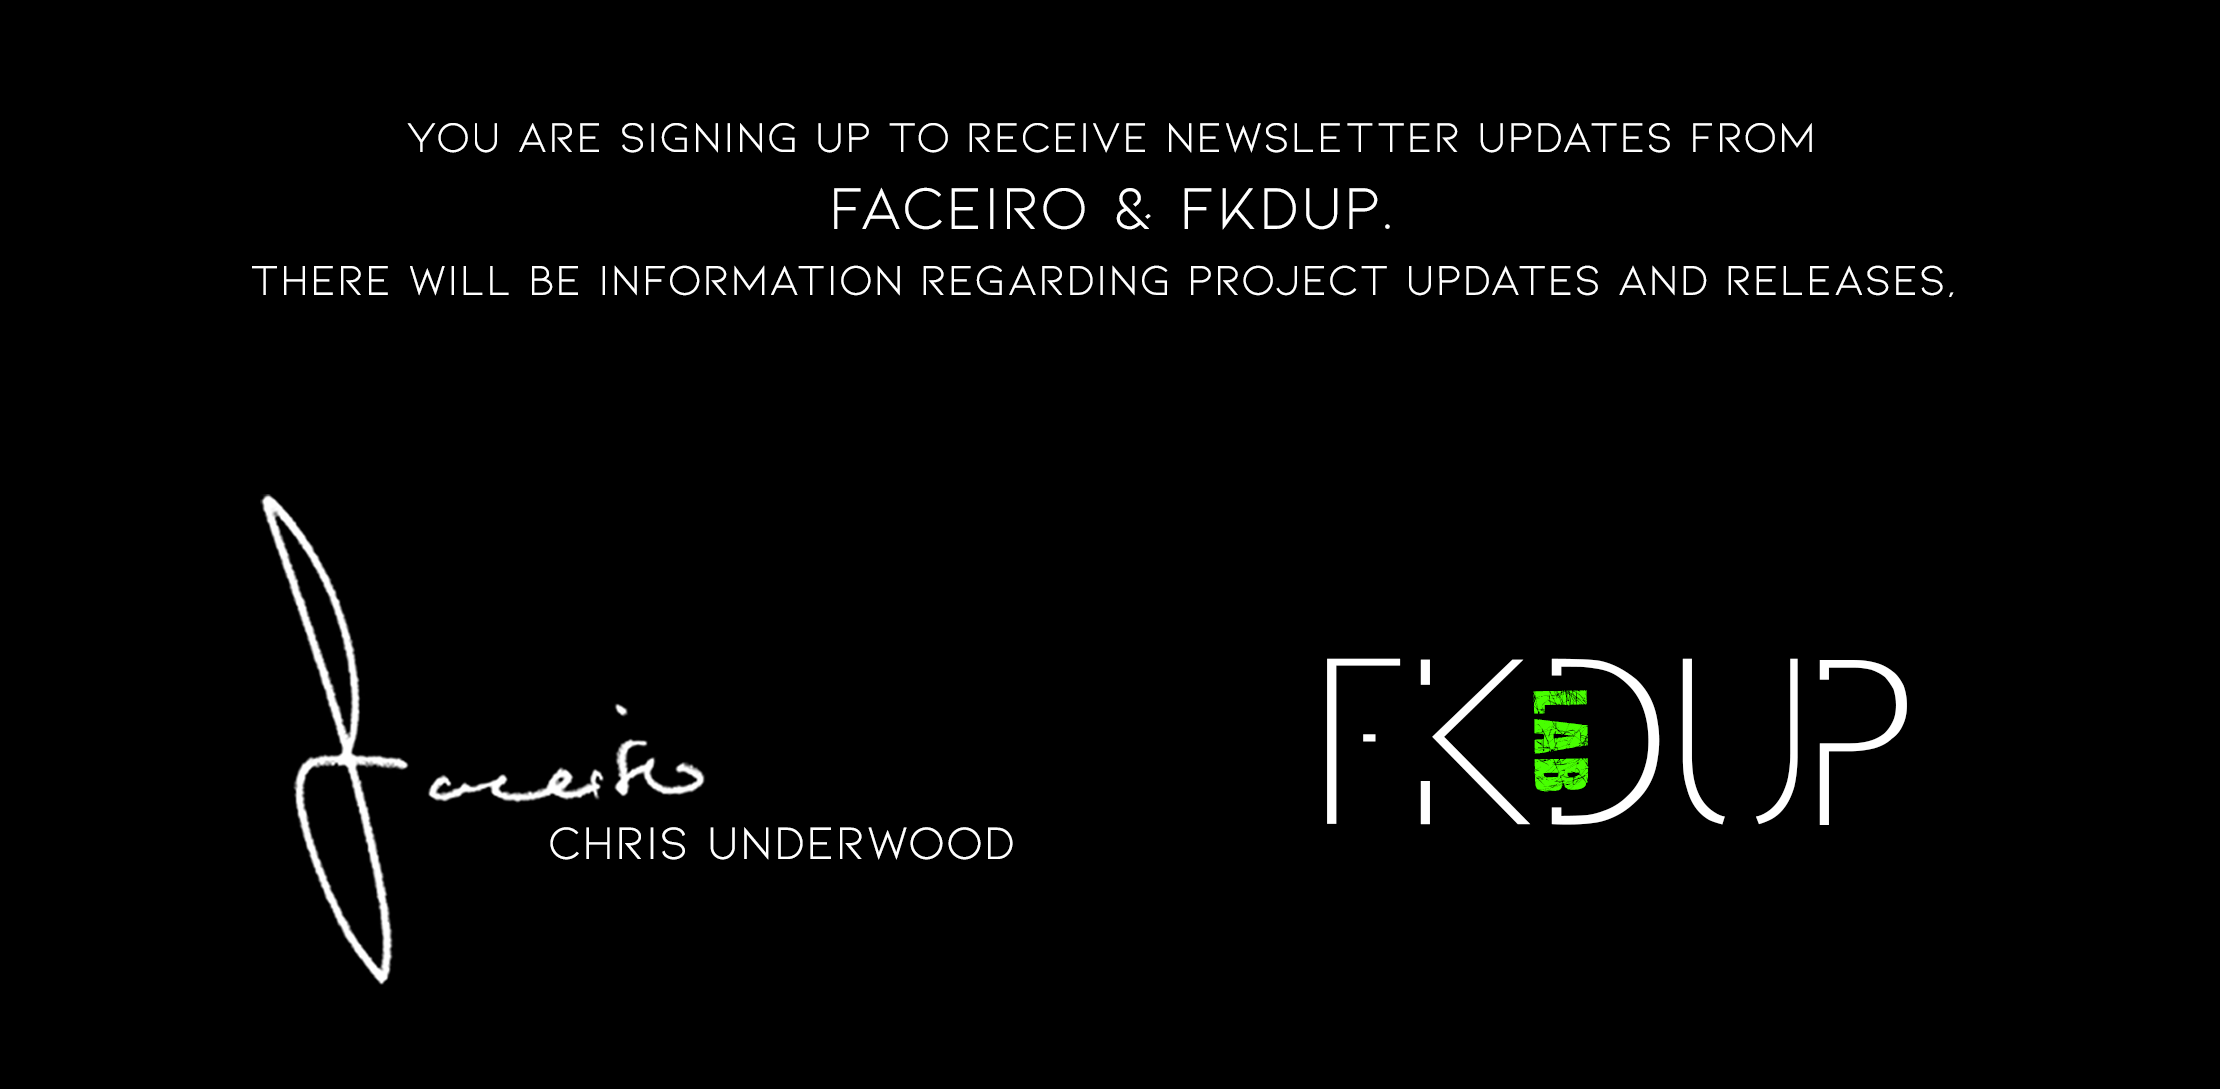 You are signing up to receive newsletter updates from Faceiro & FKDUP.  There will be information regarding project updates and releases,